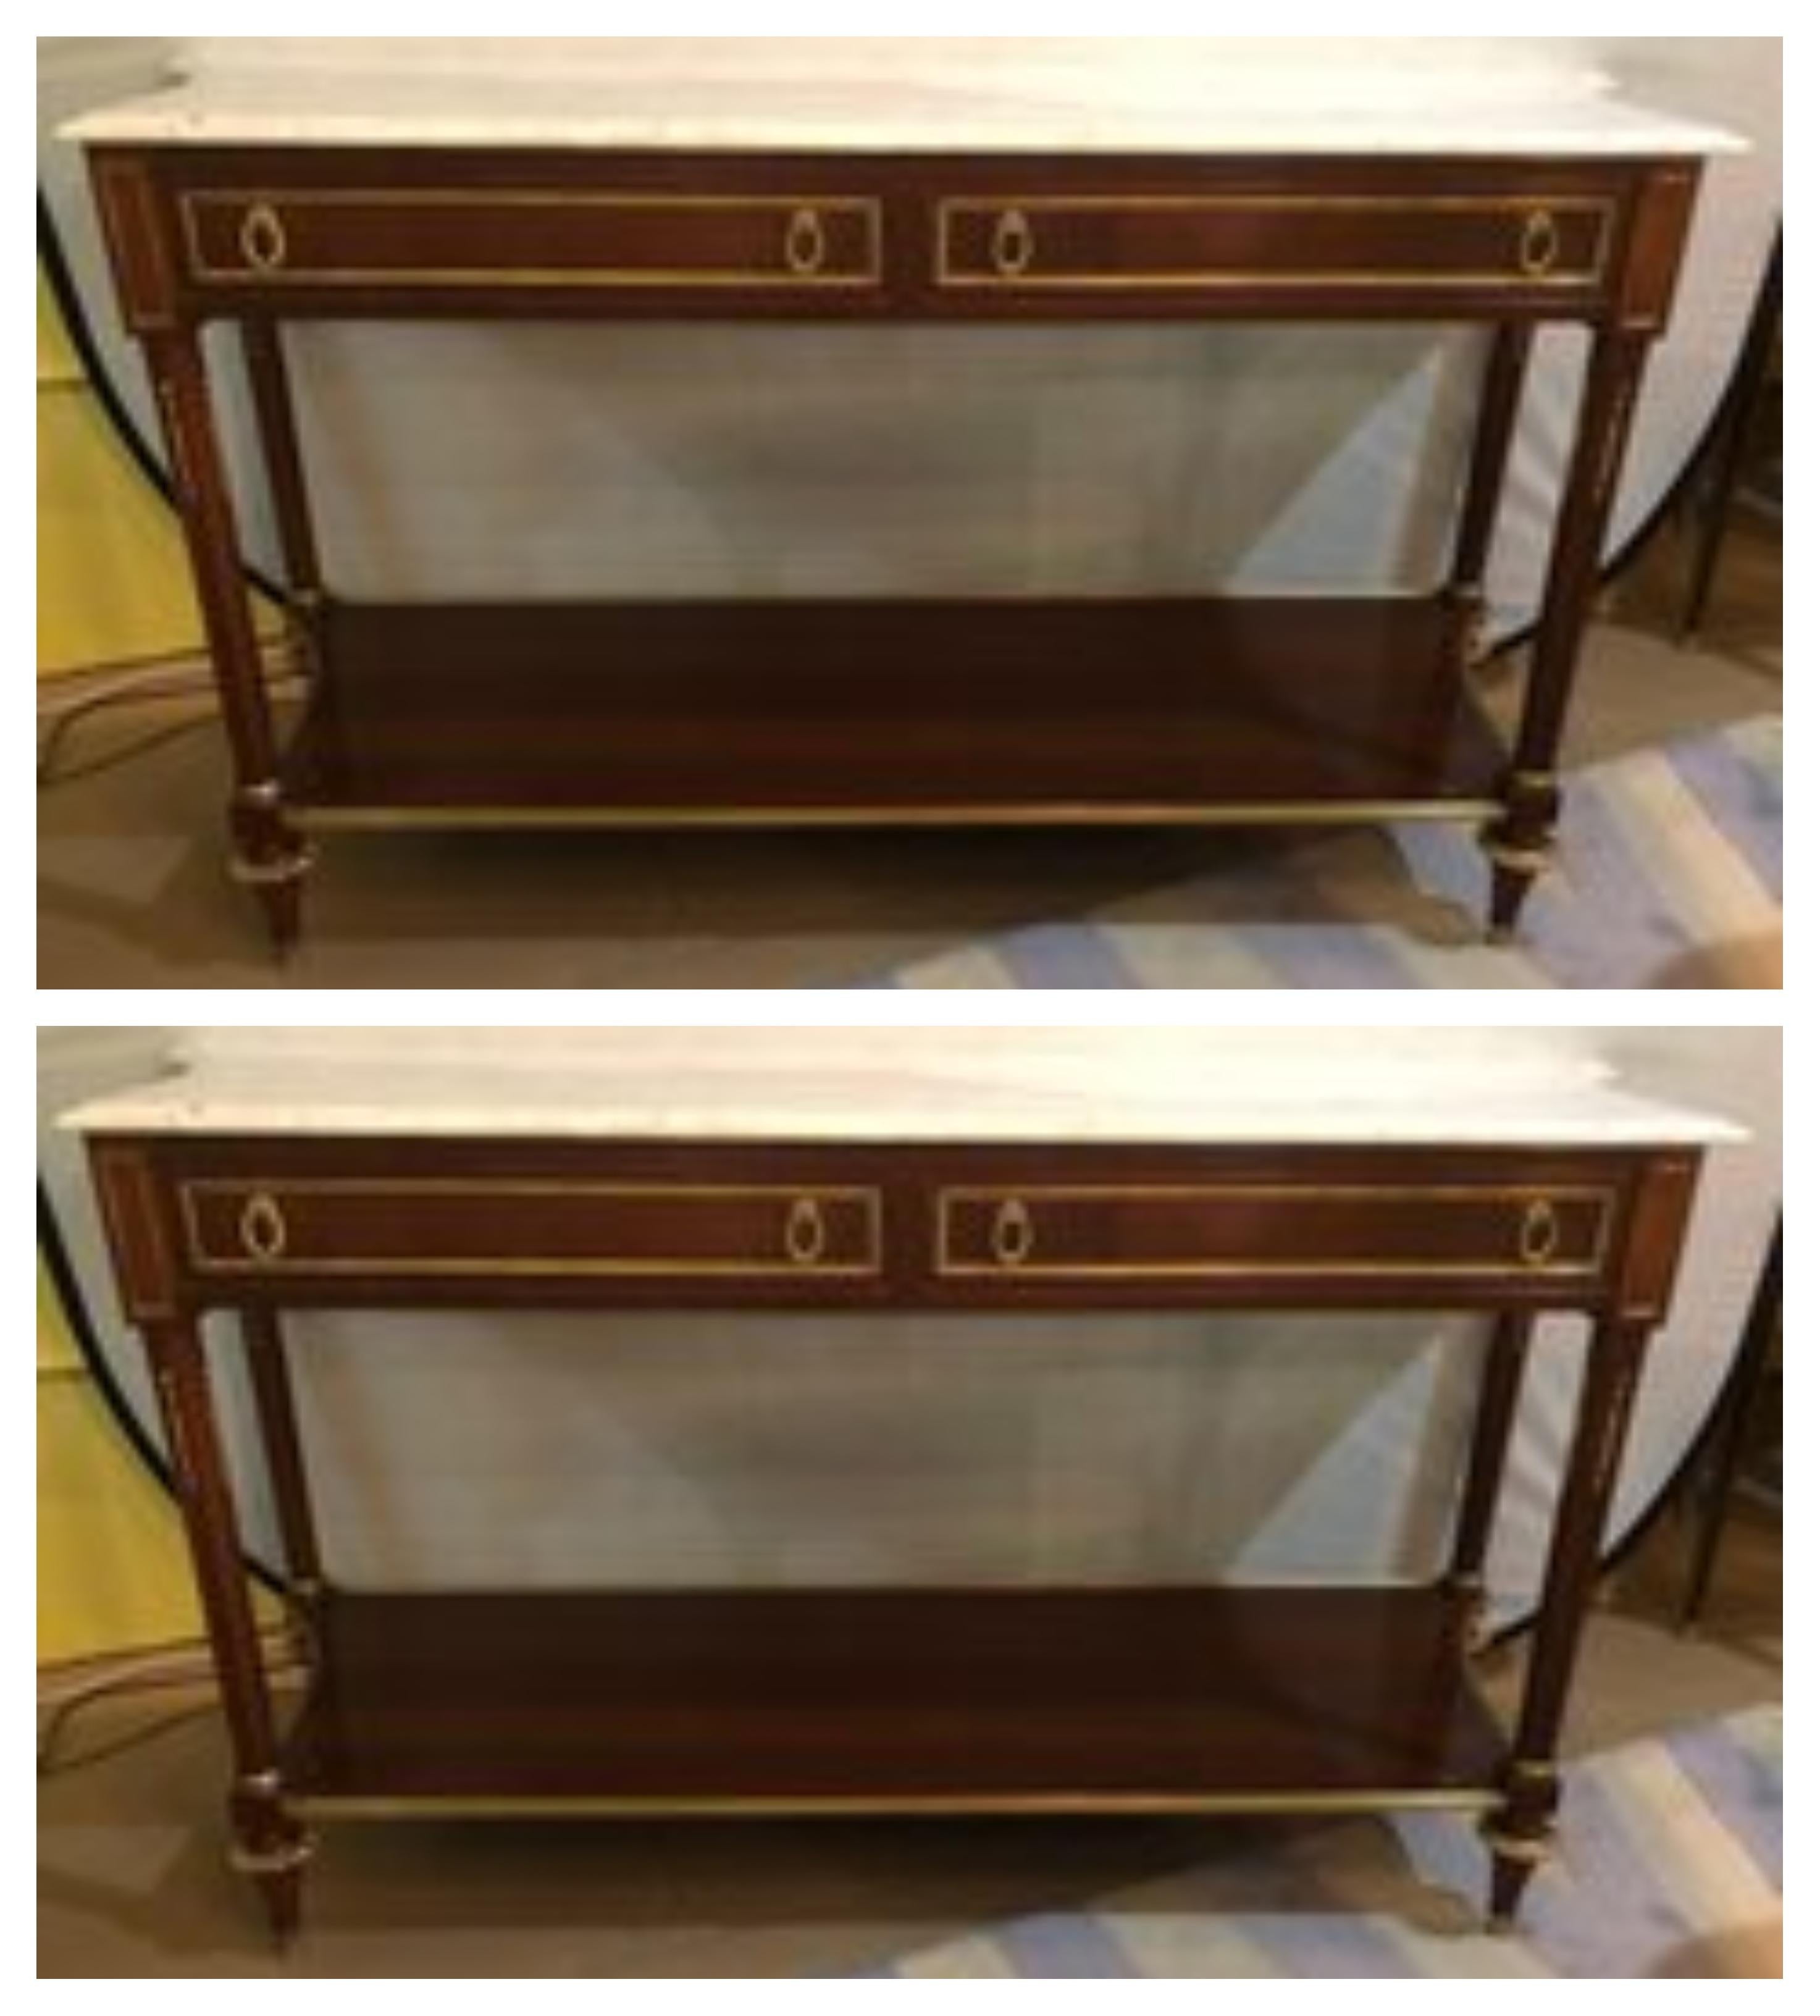 Marble Top Russian Neoclassical Console w Concave Sides & Bronze Mounts . In a word, Spectacular is this fine custom quality constructed Console or Sideboard. Having a thick marble top above a double bronze framed set of drawers leading to concave